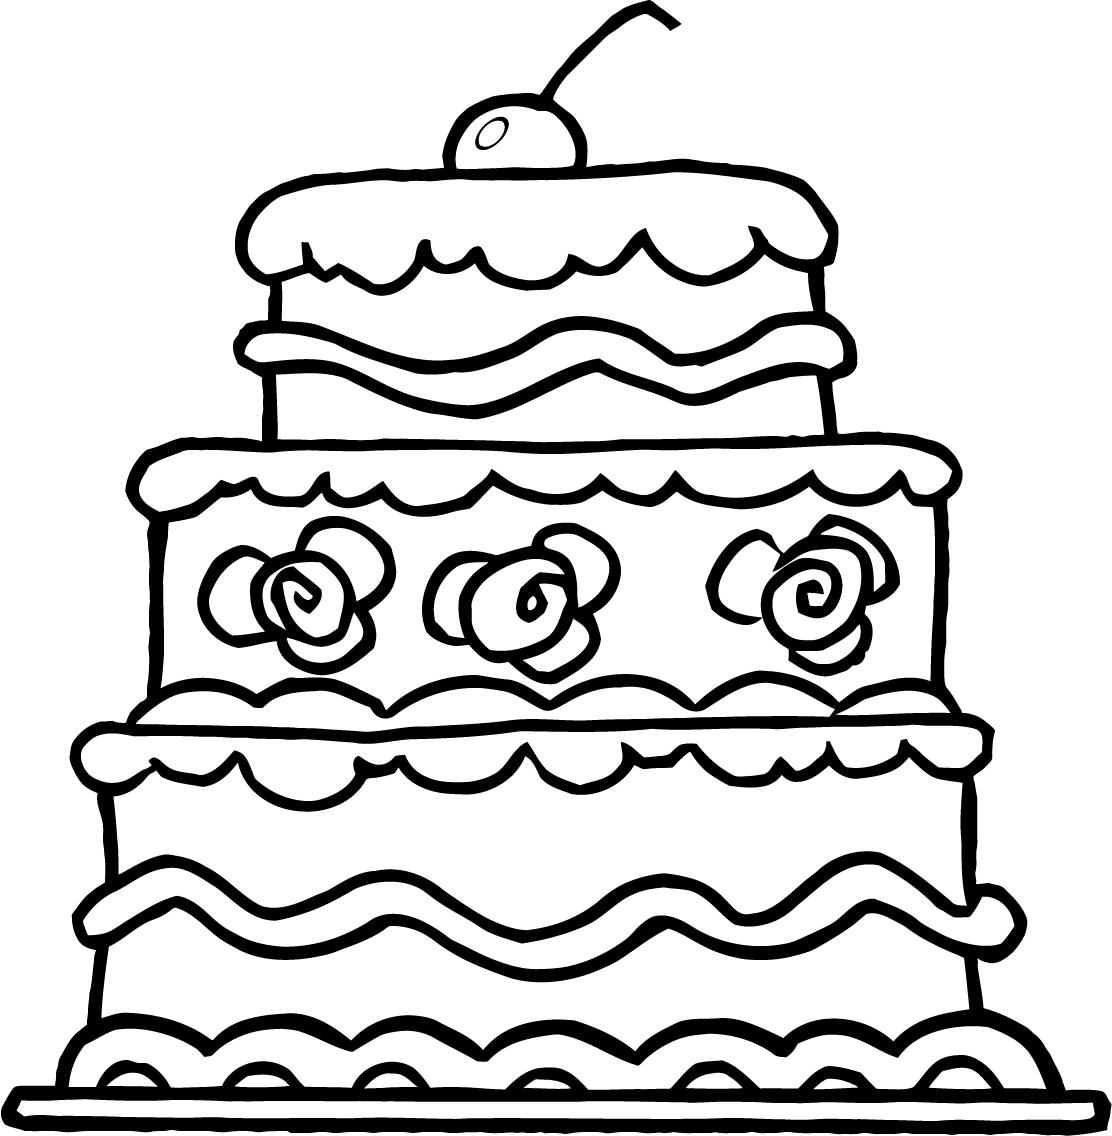 Cake coloring pages to download and print for free